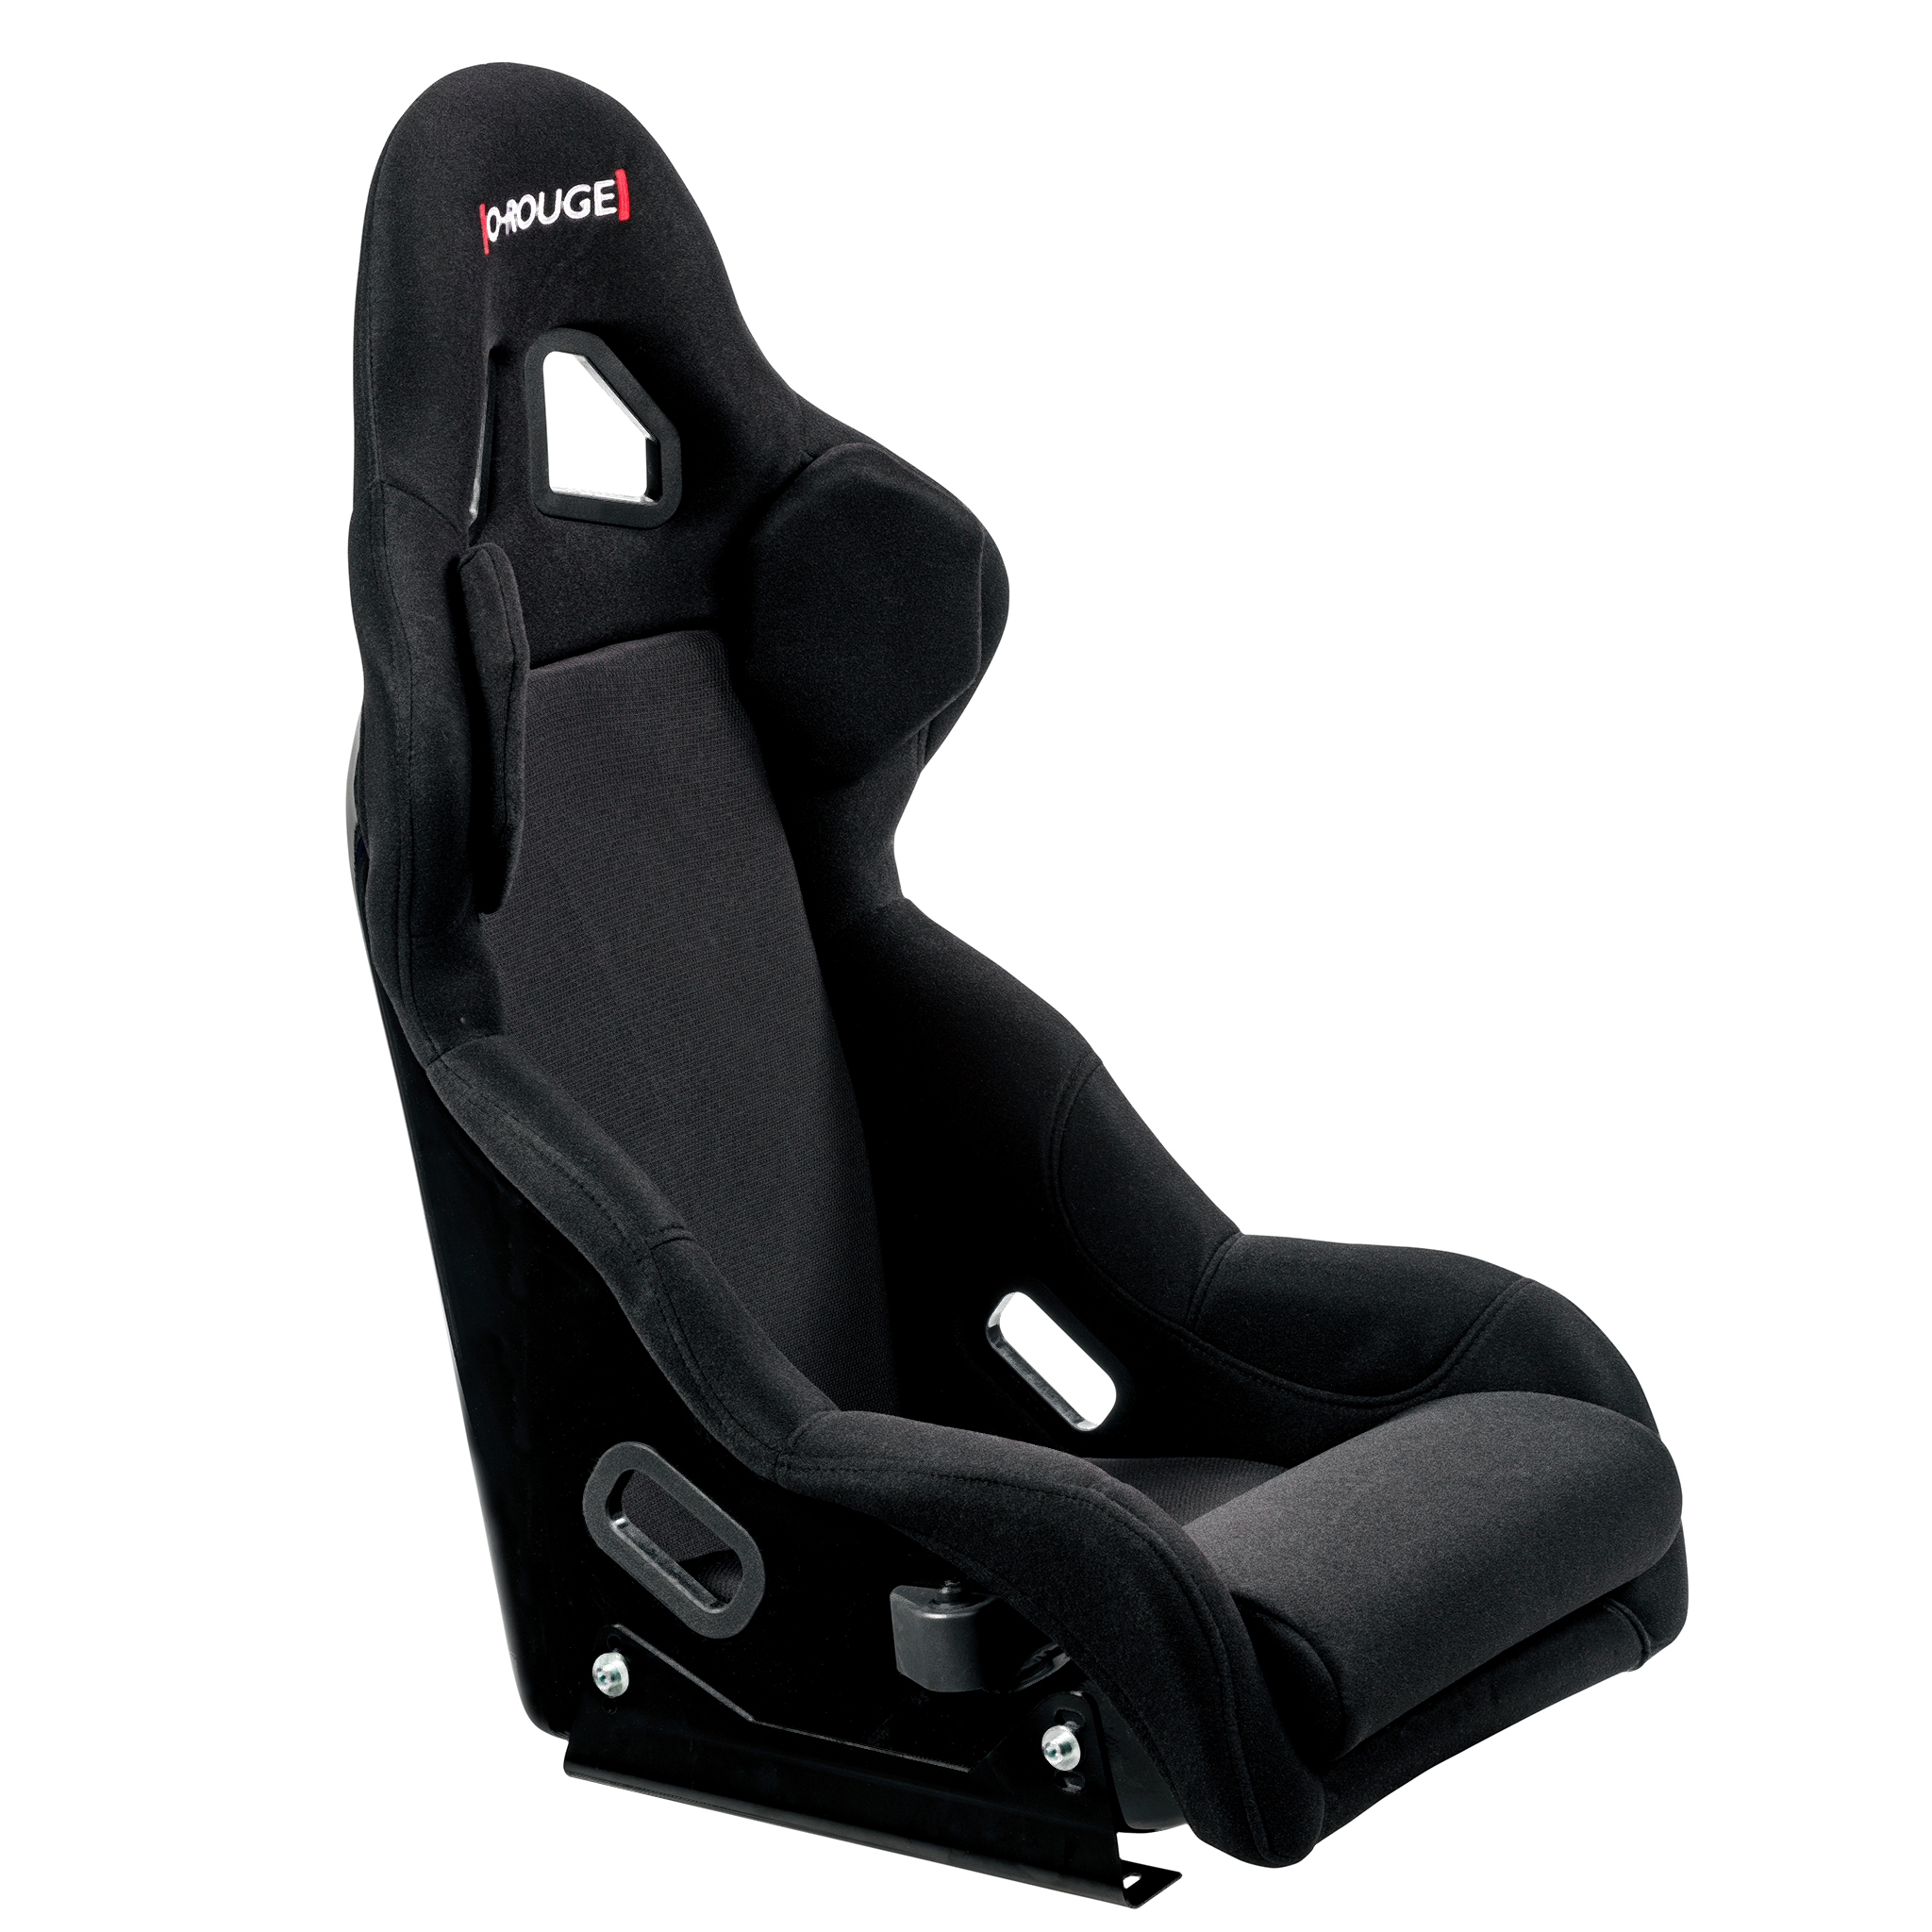 O-Rouge C1 Cold Fusion Racing Seat